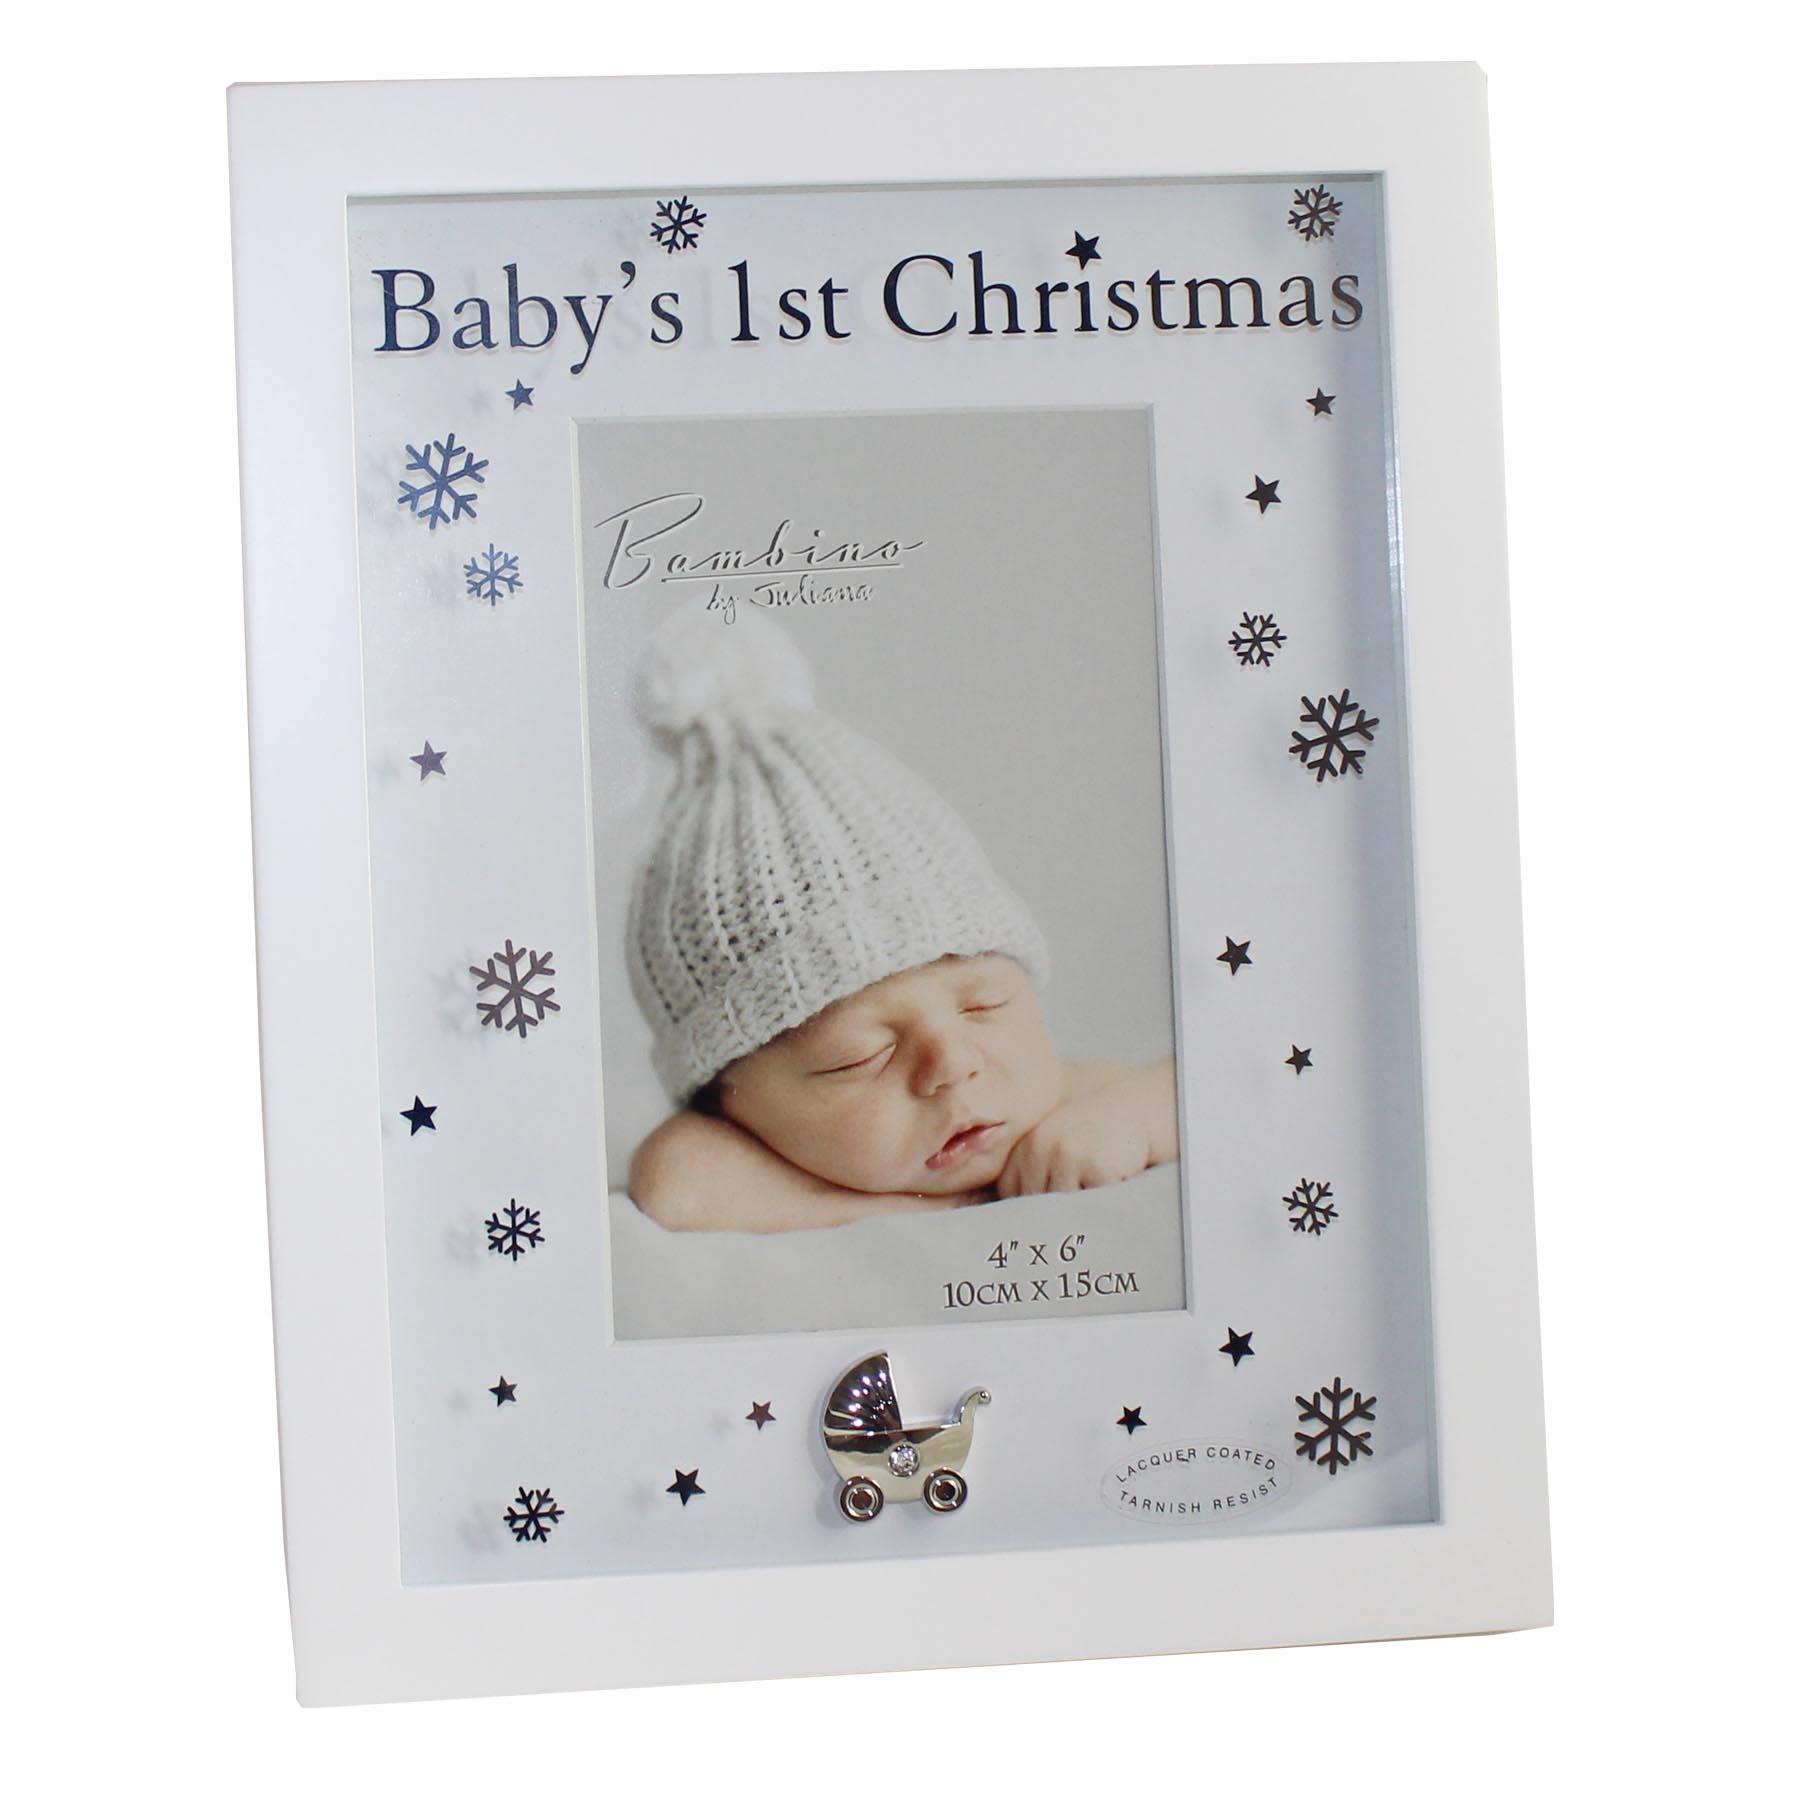 Bambino Baby's 1st Christmas 4x6 Photo Frame - White and Silver